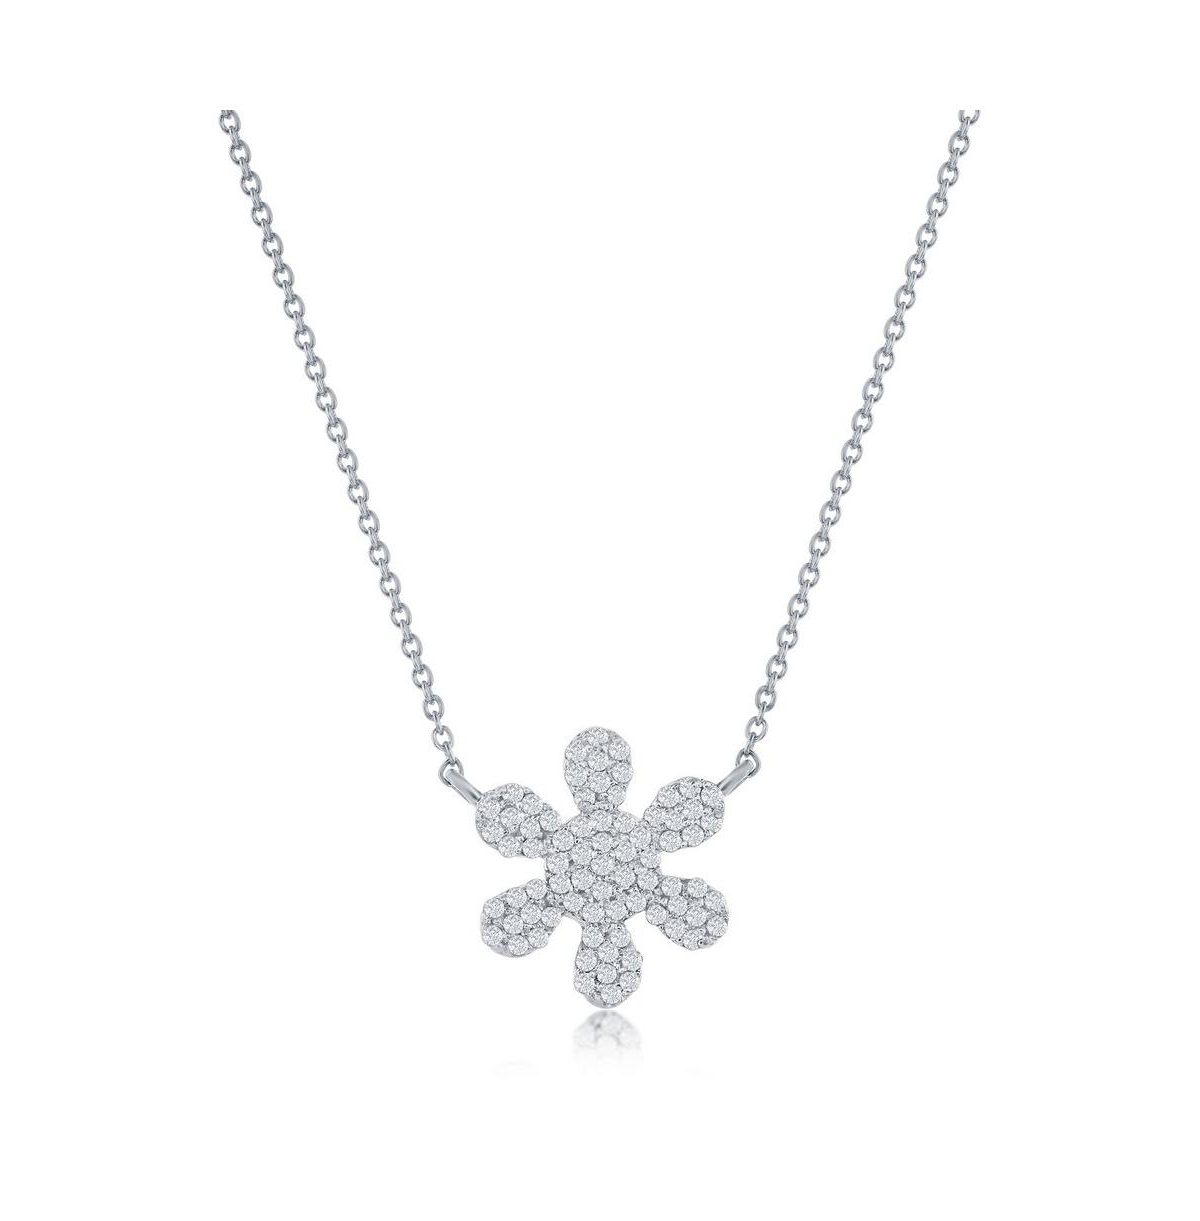 SIMONA FLOWER DIAMOND NECKLACE (0.25 CT. T.W.) - 71 STONES IN STERLING SILVER